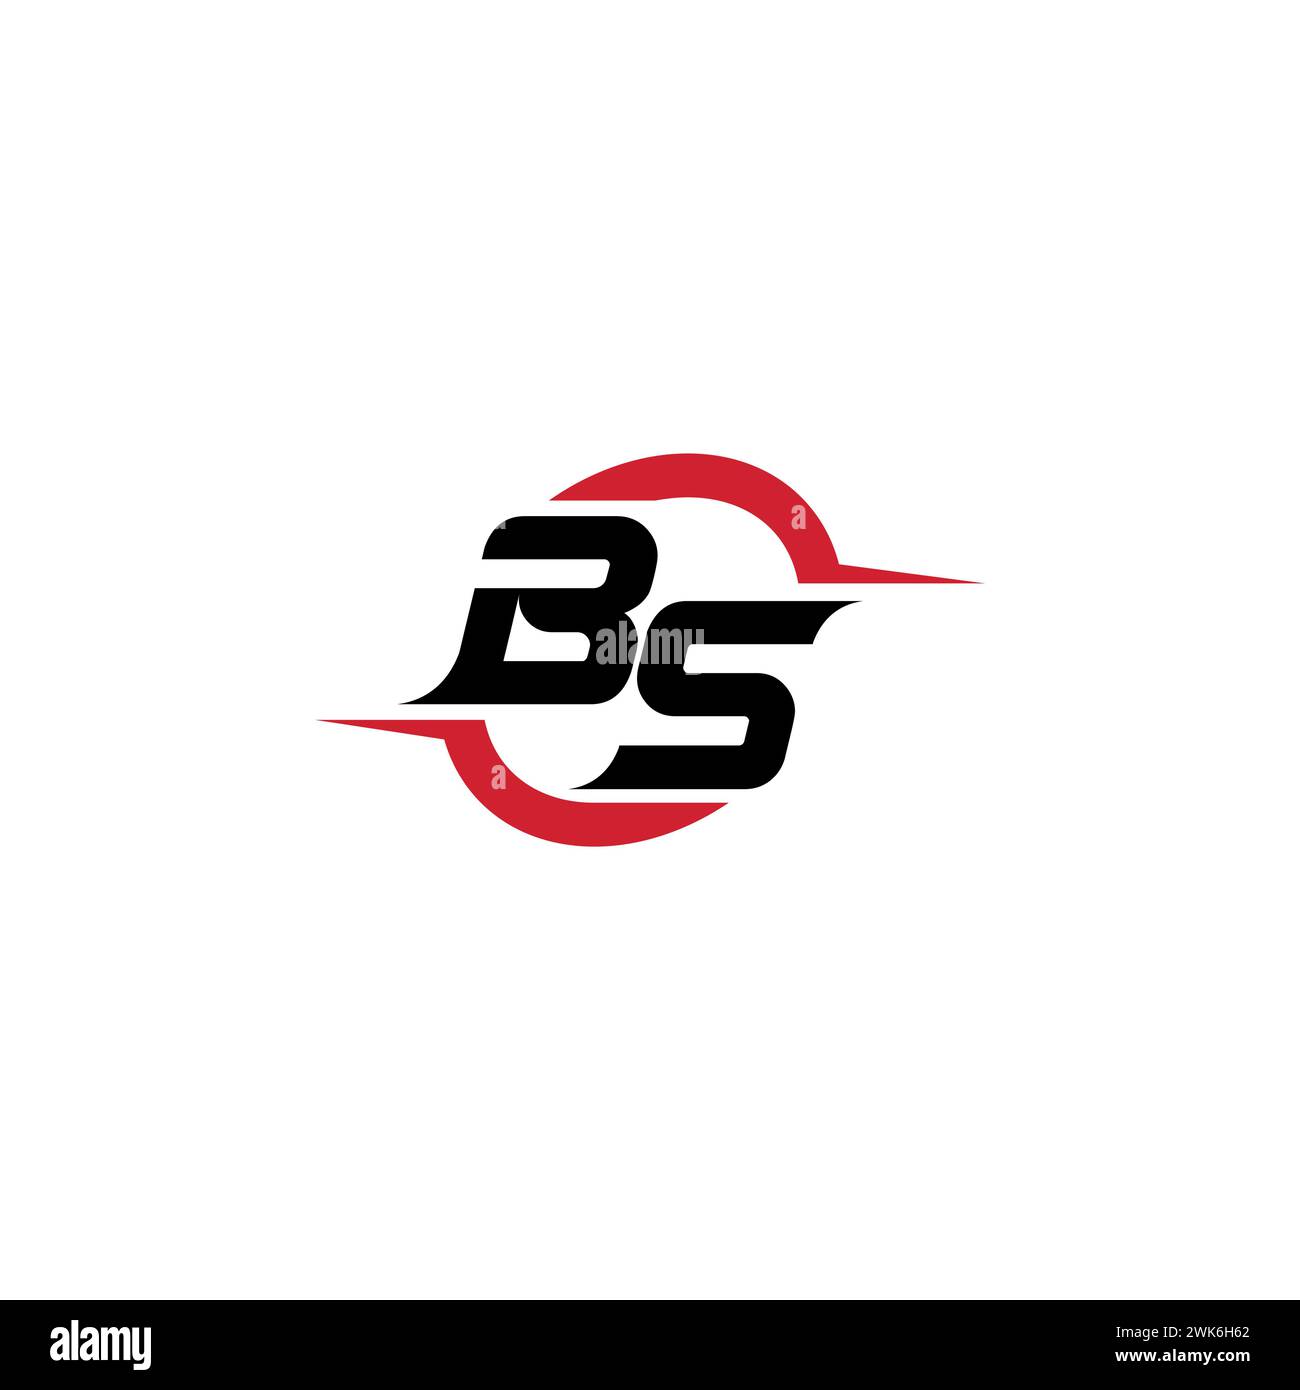 BS initial logo cool and stylish concept for esport or gaming logo as your inspirational Stock Vector